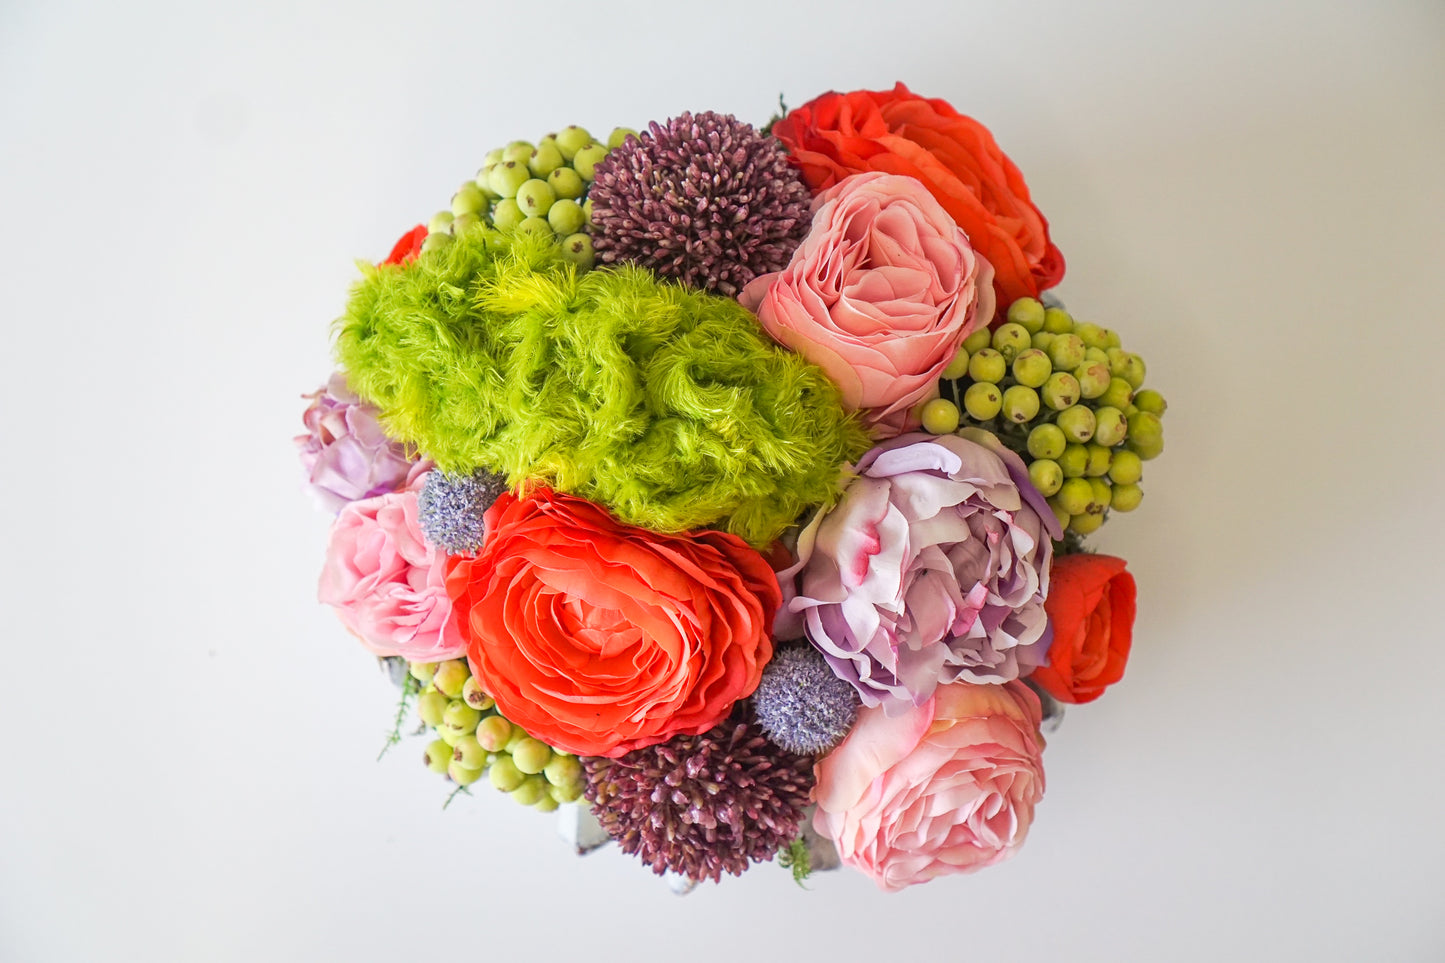 Bright Florals in Wavy Bowl